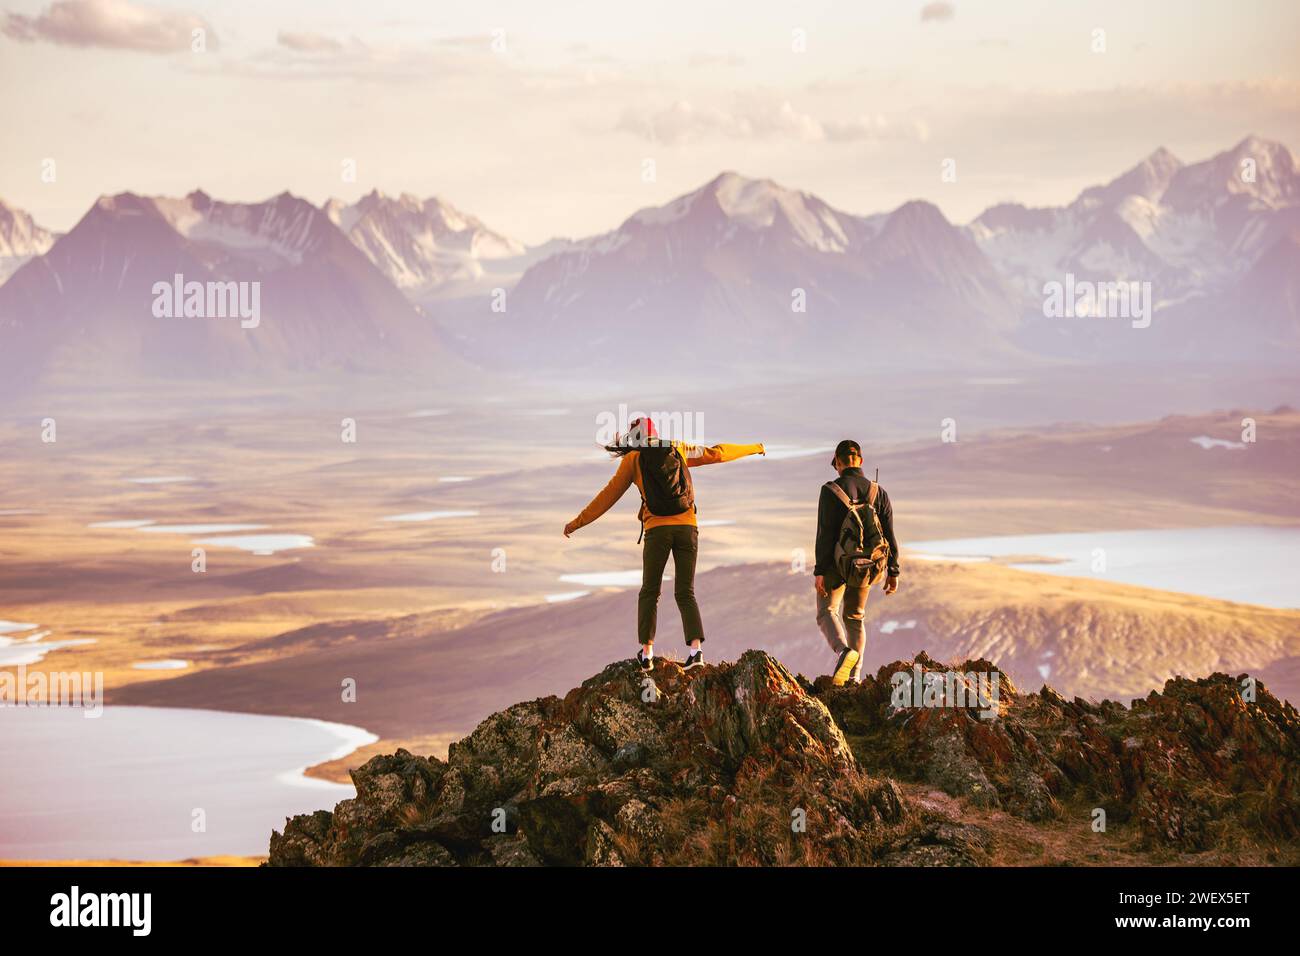 Young couple of hikers with backpacks is walking at mountain top with great view Stock Photo